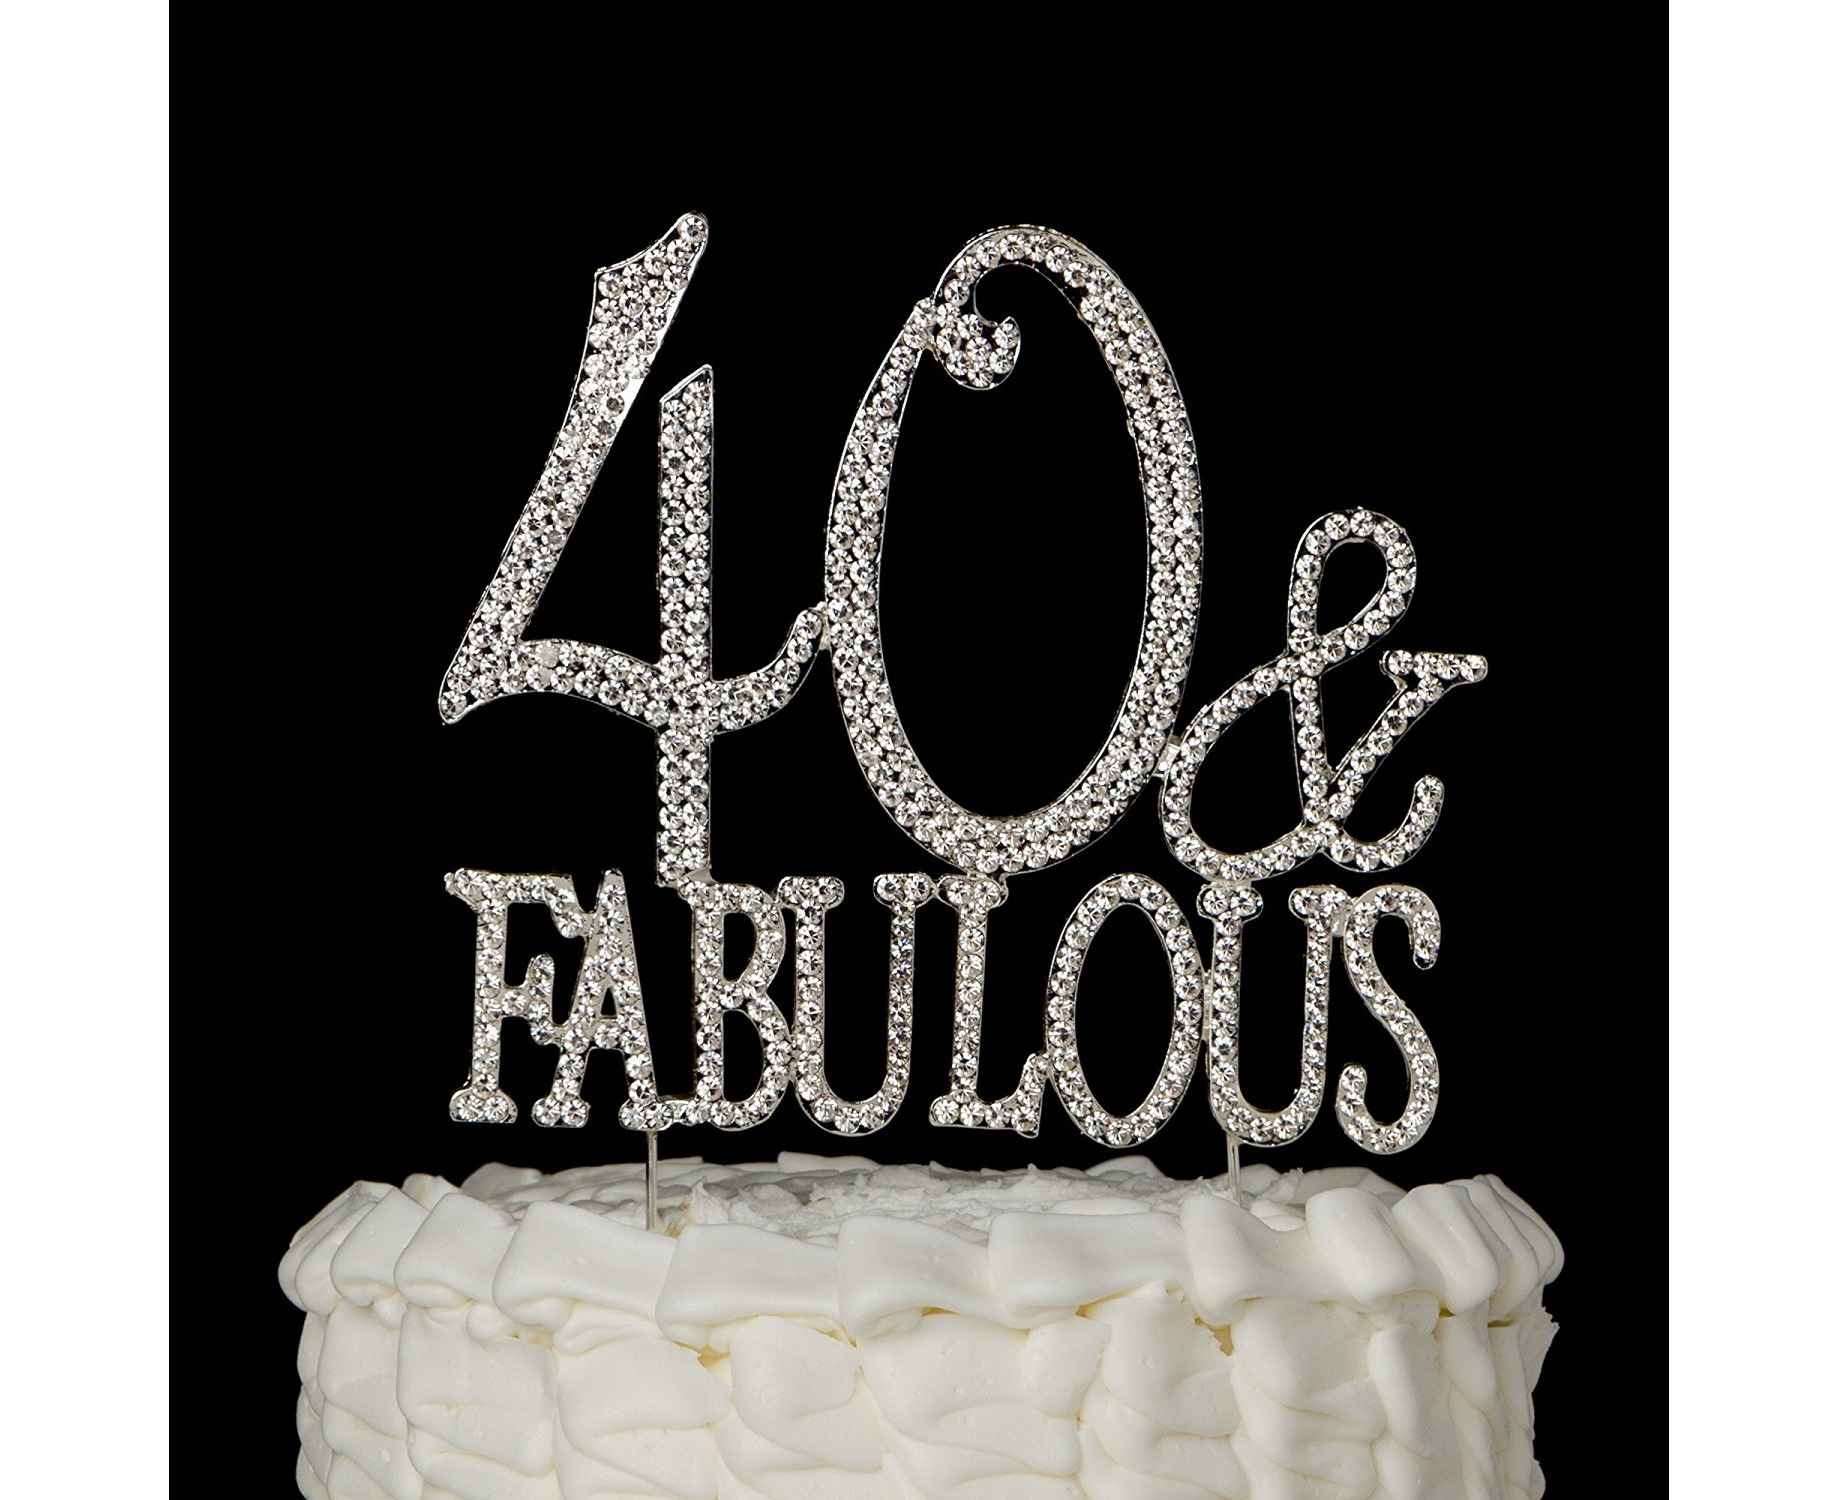 40 & Fabulous Cake Topper 40th Birthday Party Decor Many Colors Glitter  Picks Decorations Supplies Cake Accessory - AliExpress